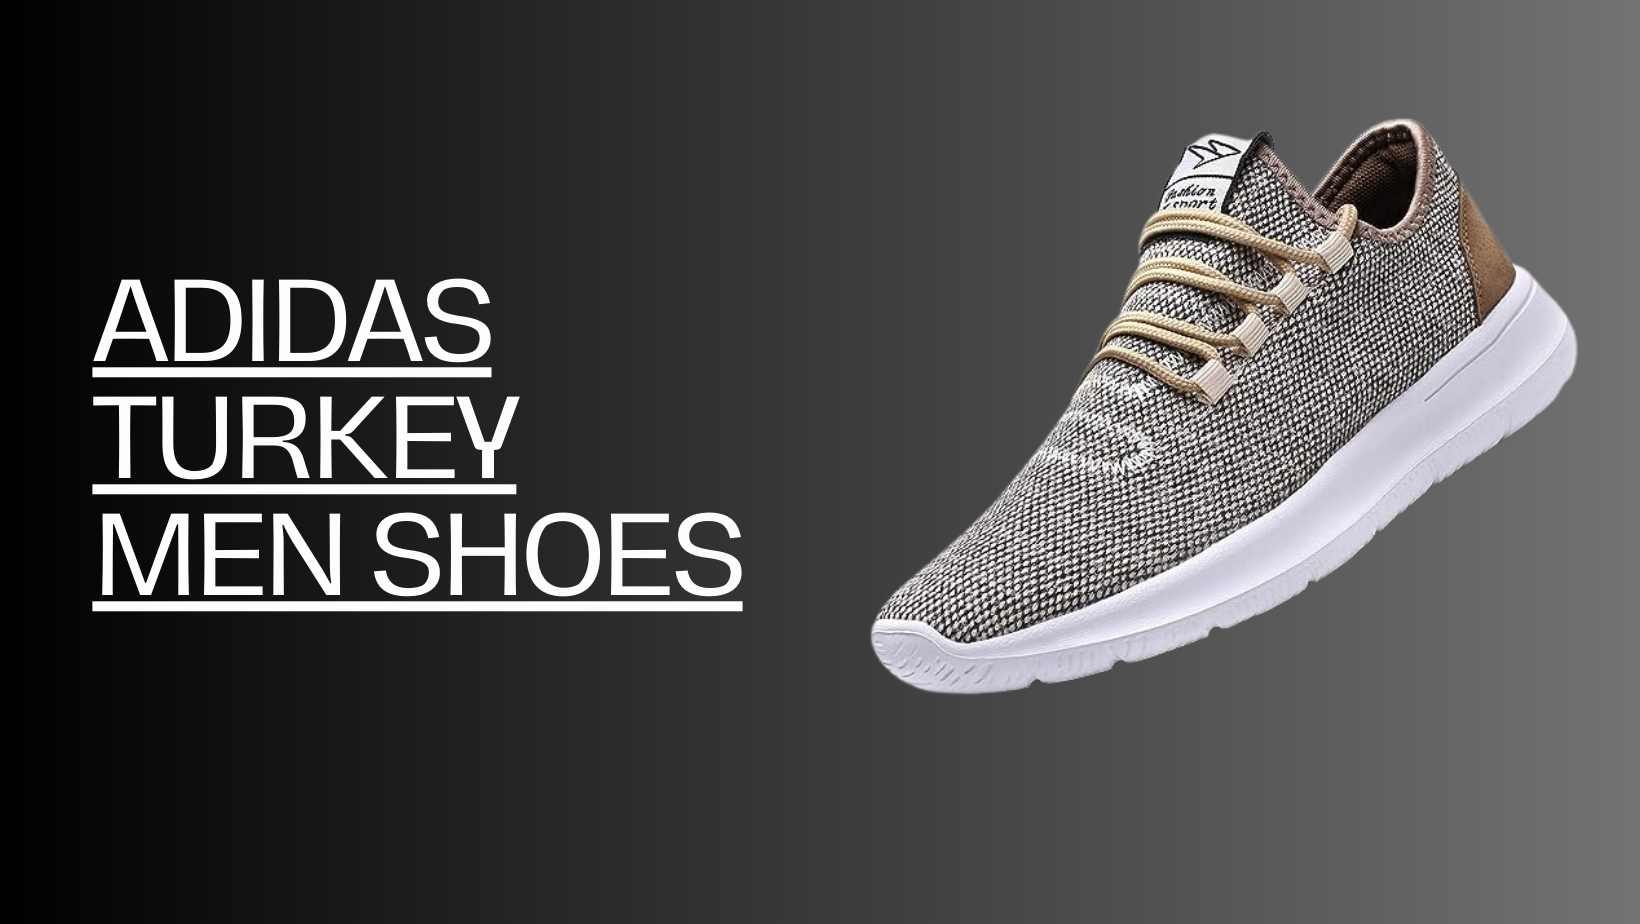 Adidas Turkey Men Shoes: The Perfect Blend of Style and Comfort